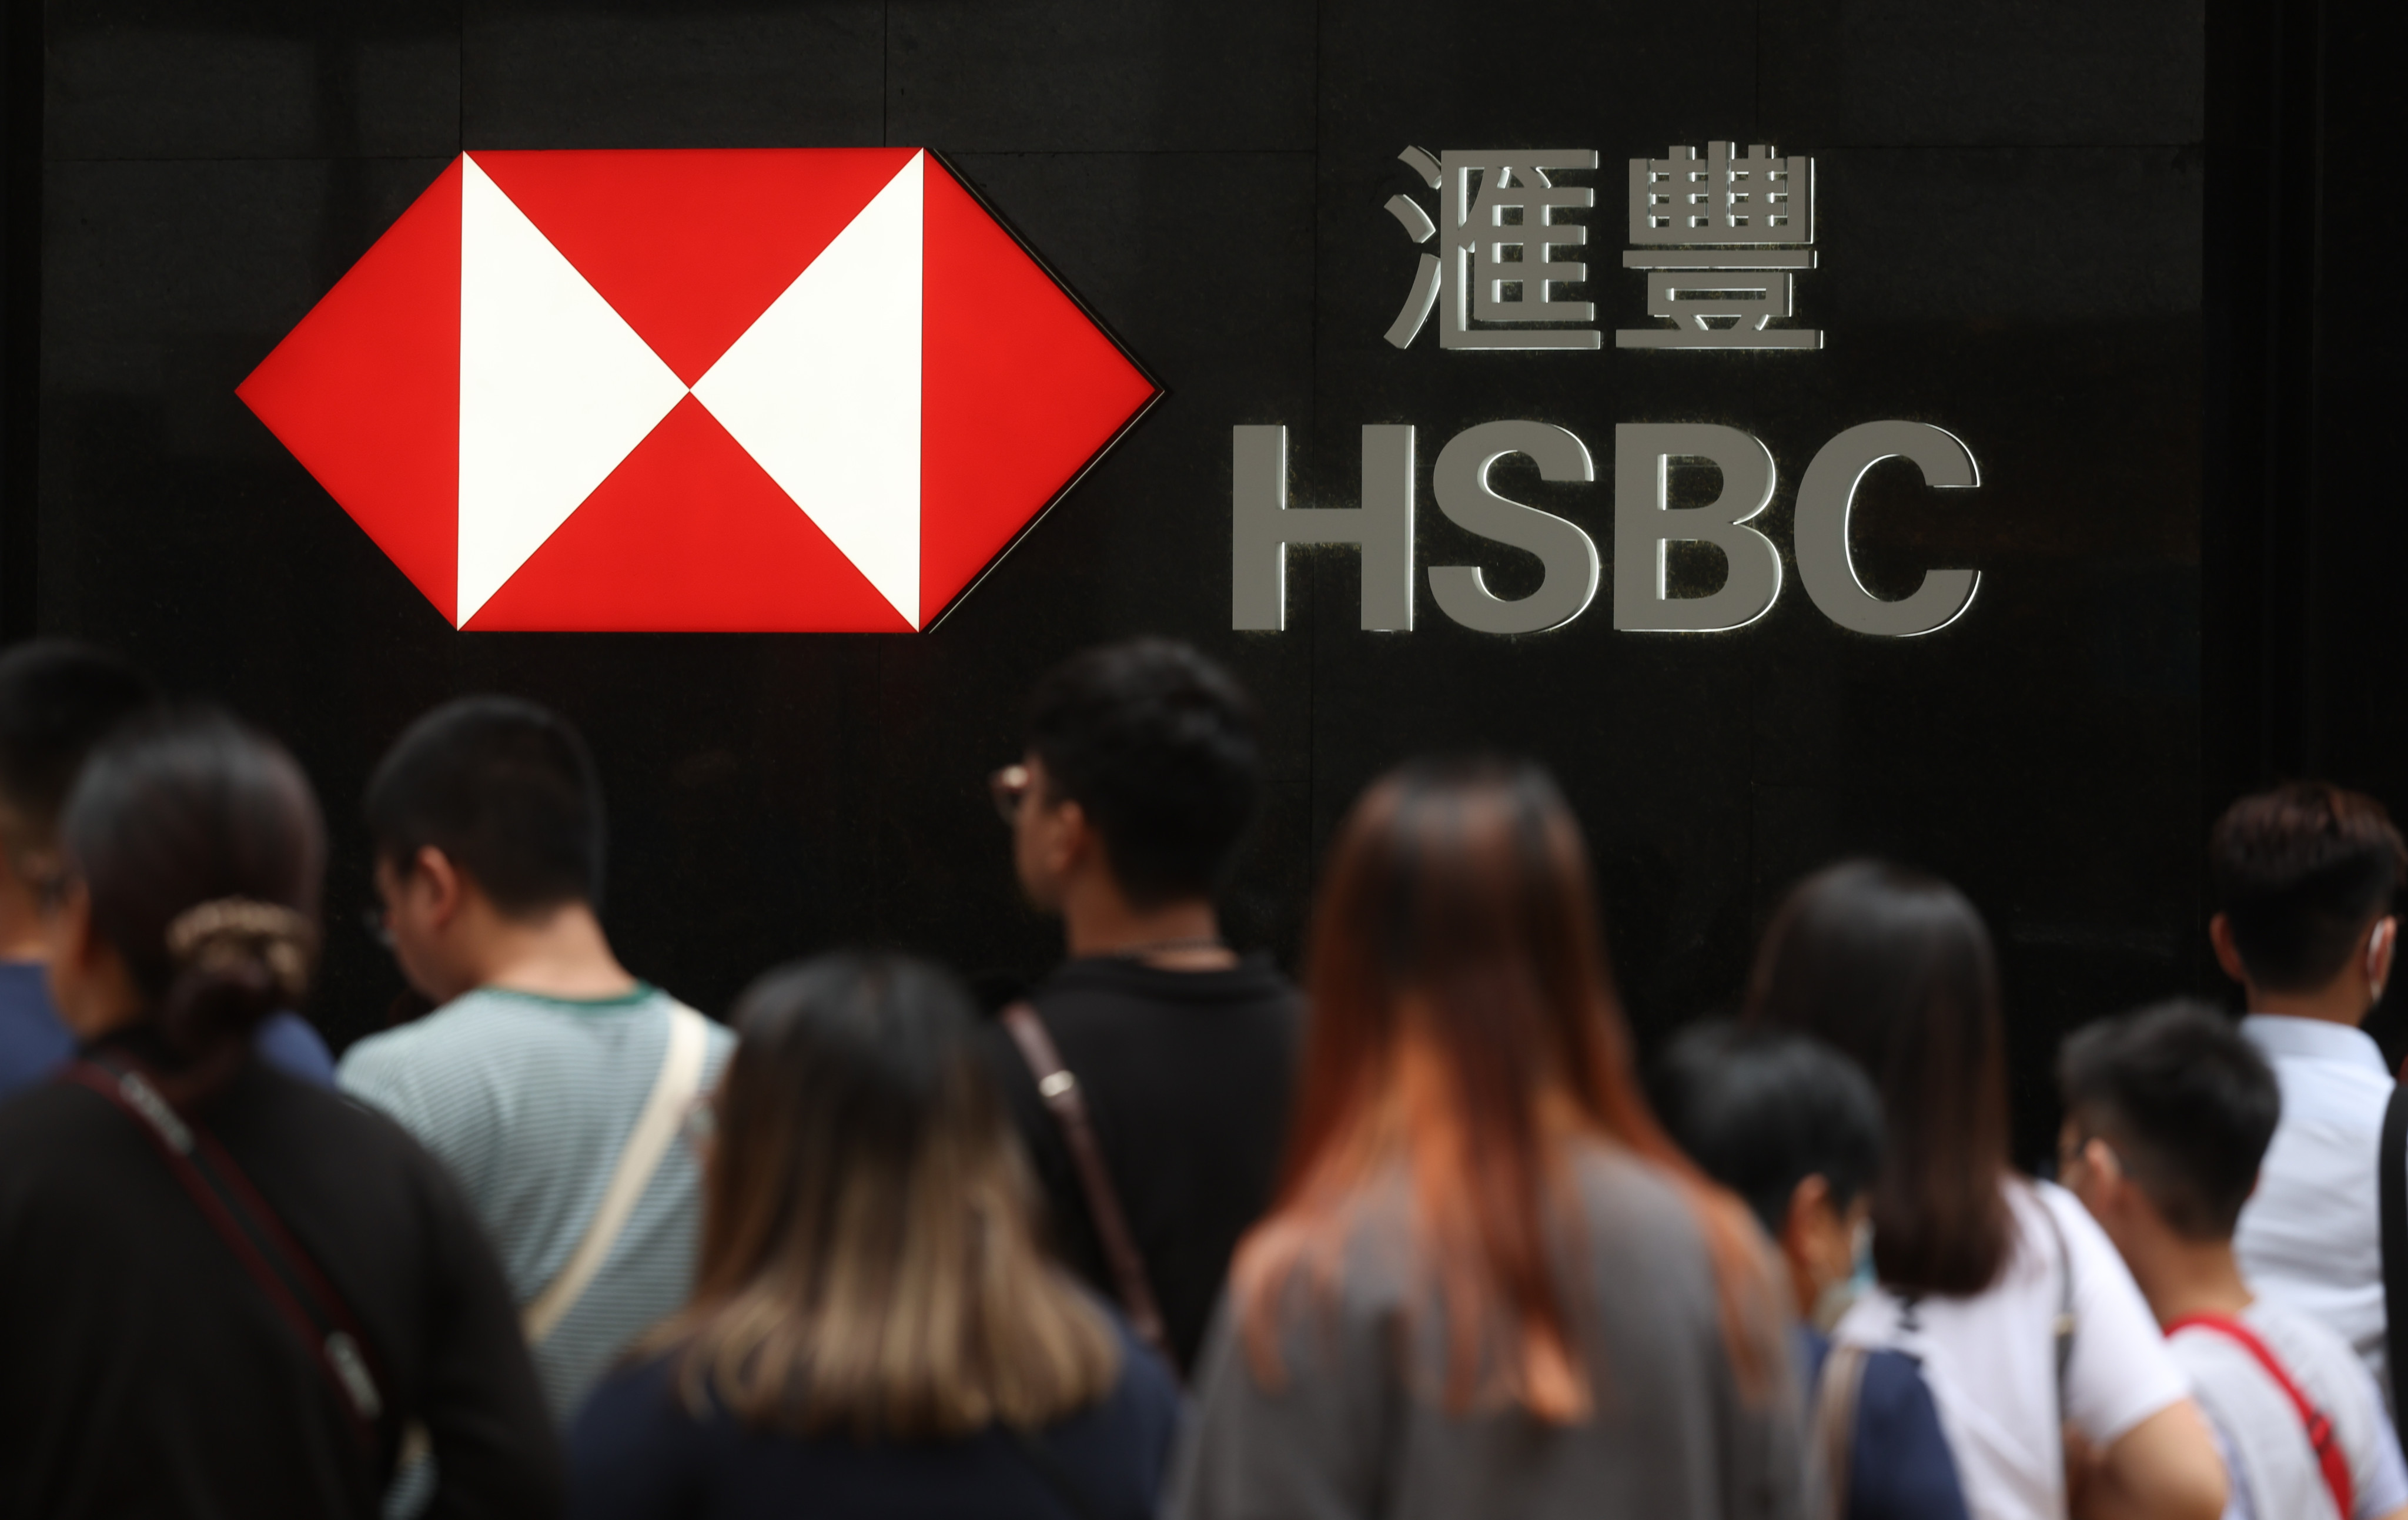 HSBC has been accused of withholding the MPF pension funds of Hongkongers moving to the UK under a citizenship scheme. Photo: Yik Yeung-man